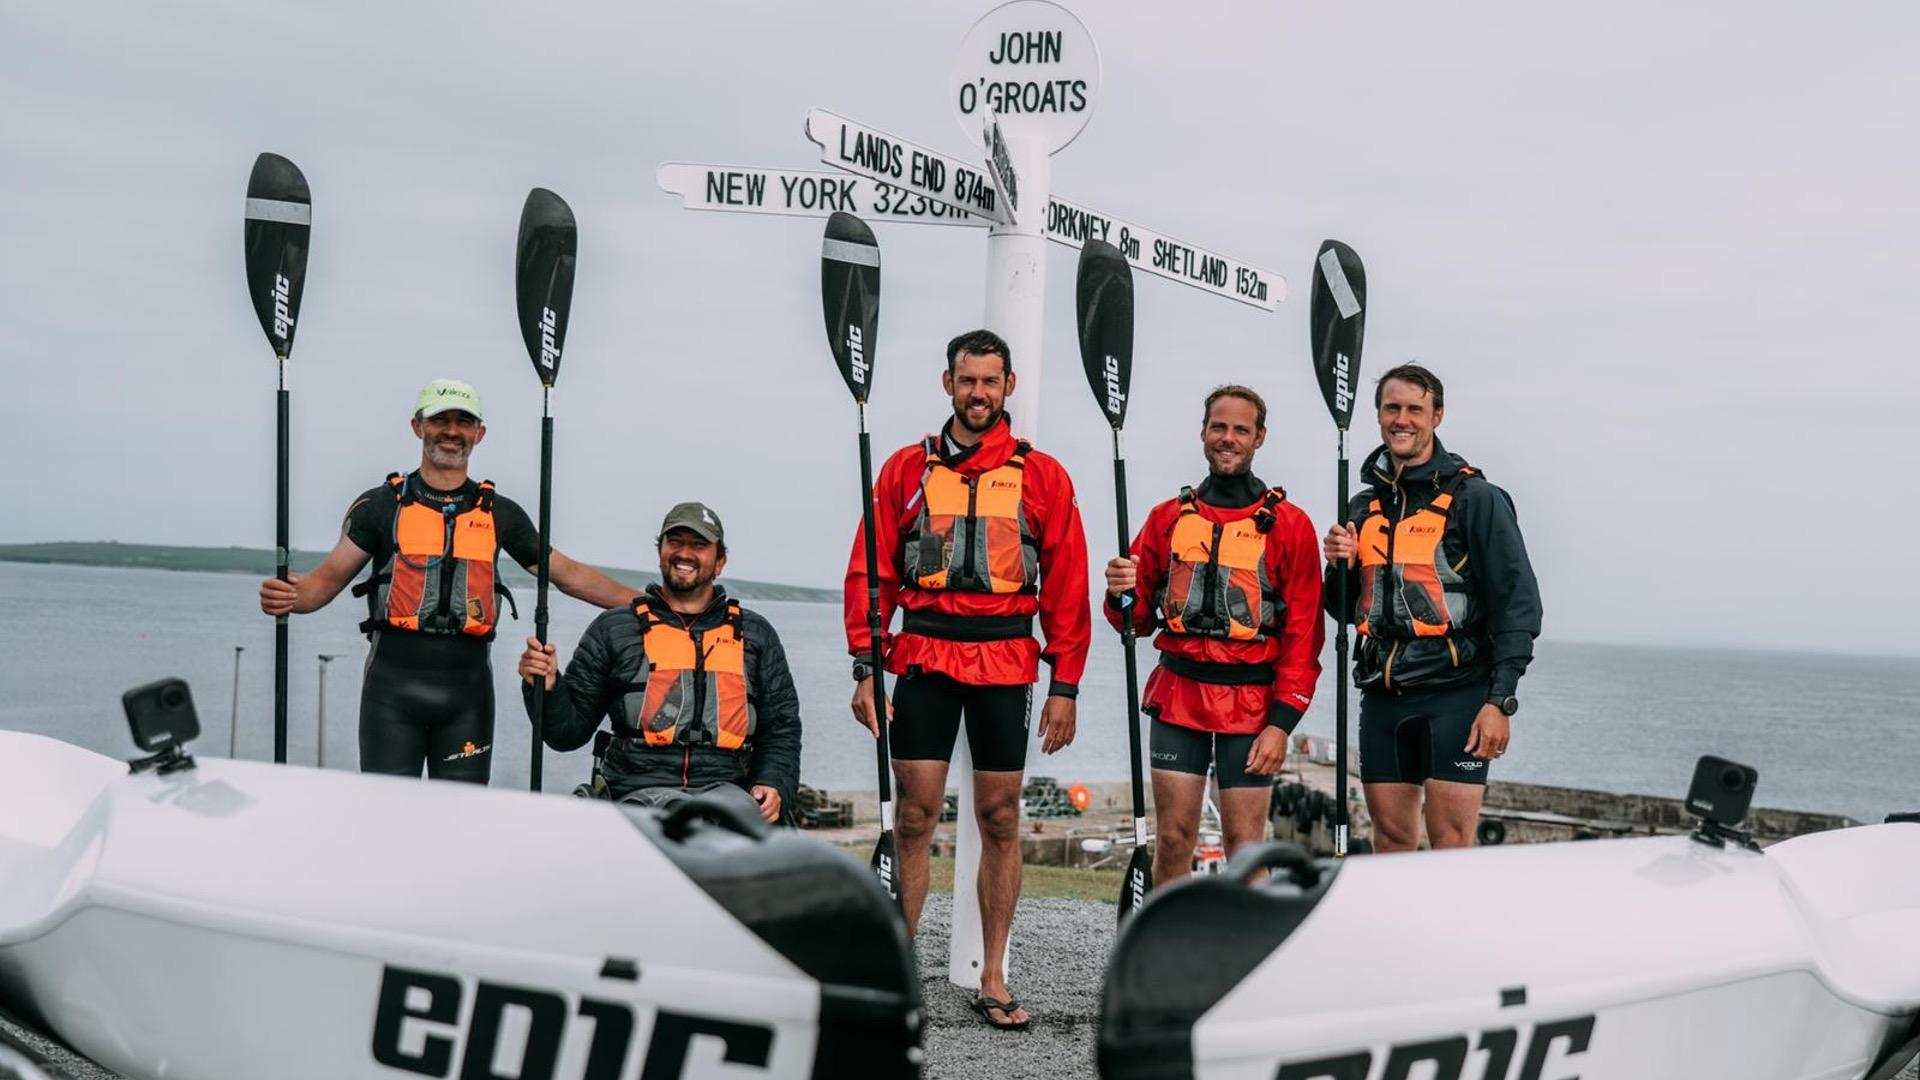 Darren Edwards and team celebrating reaching the end of their Land's End to John o' Groats challenge. Photo: Darren Edwards